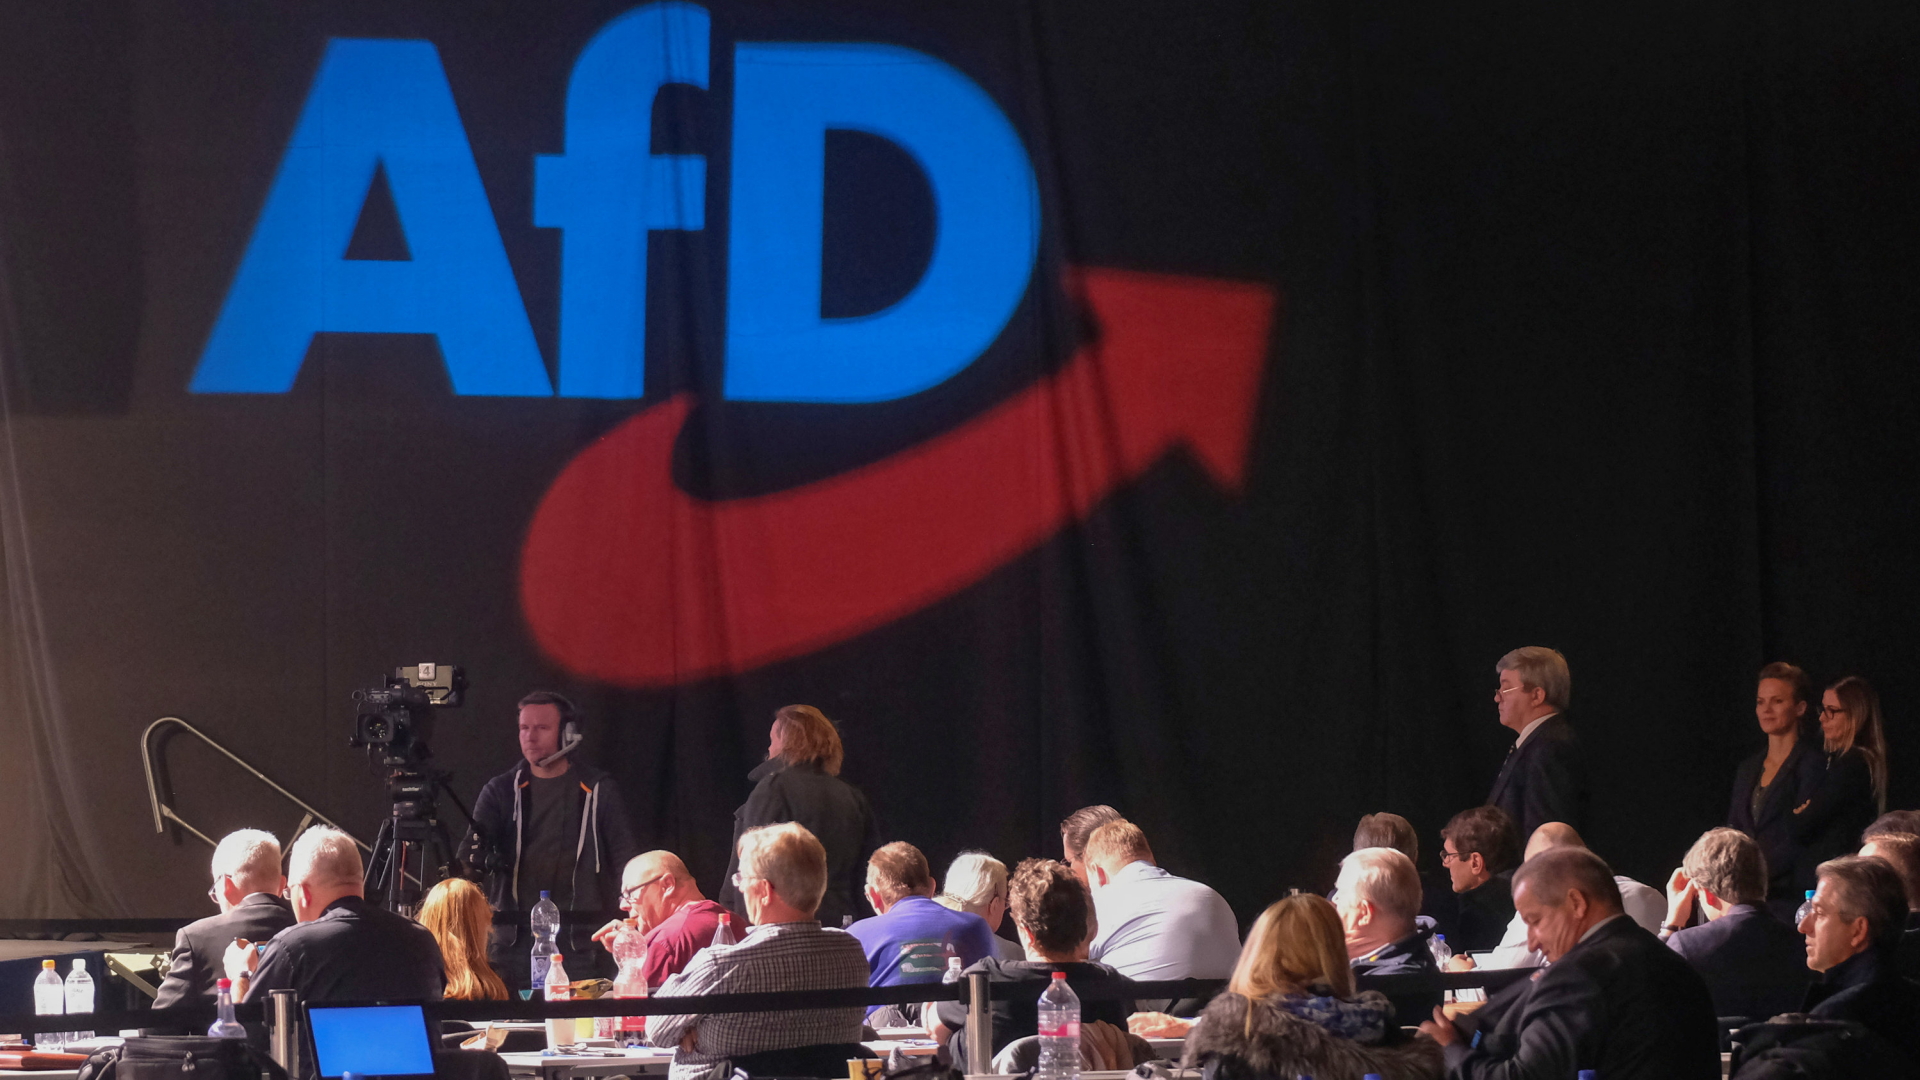 AfD-Europaparteitag in Magdeburg | dpa